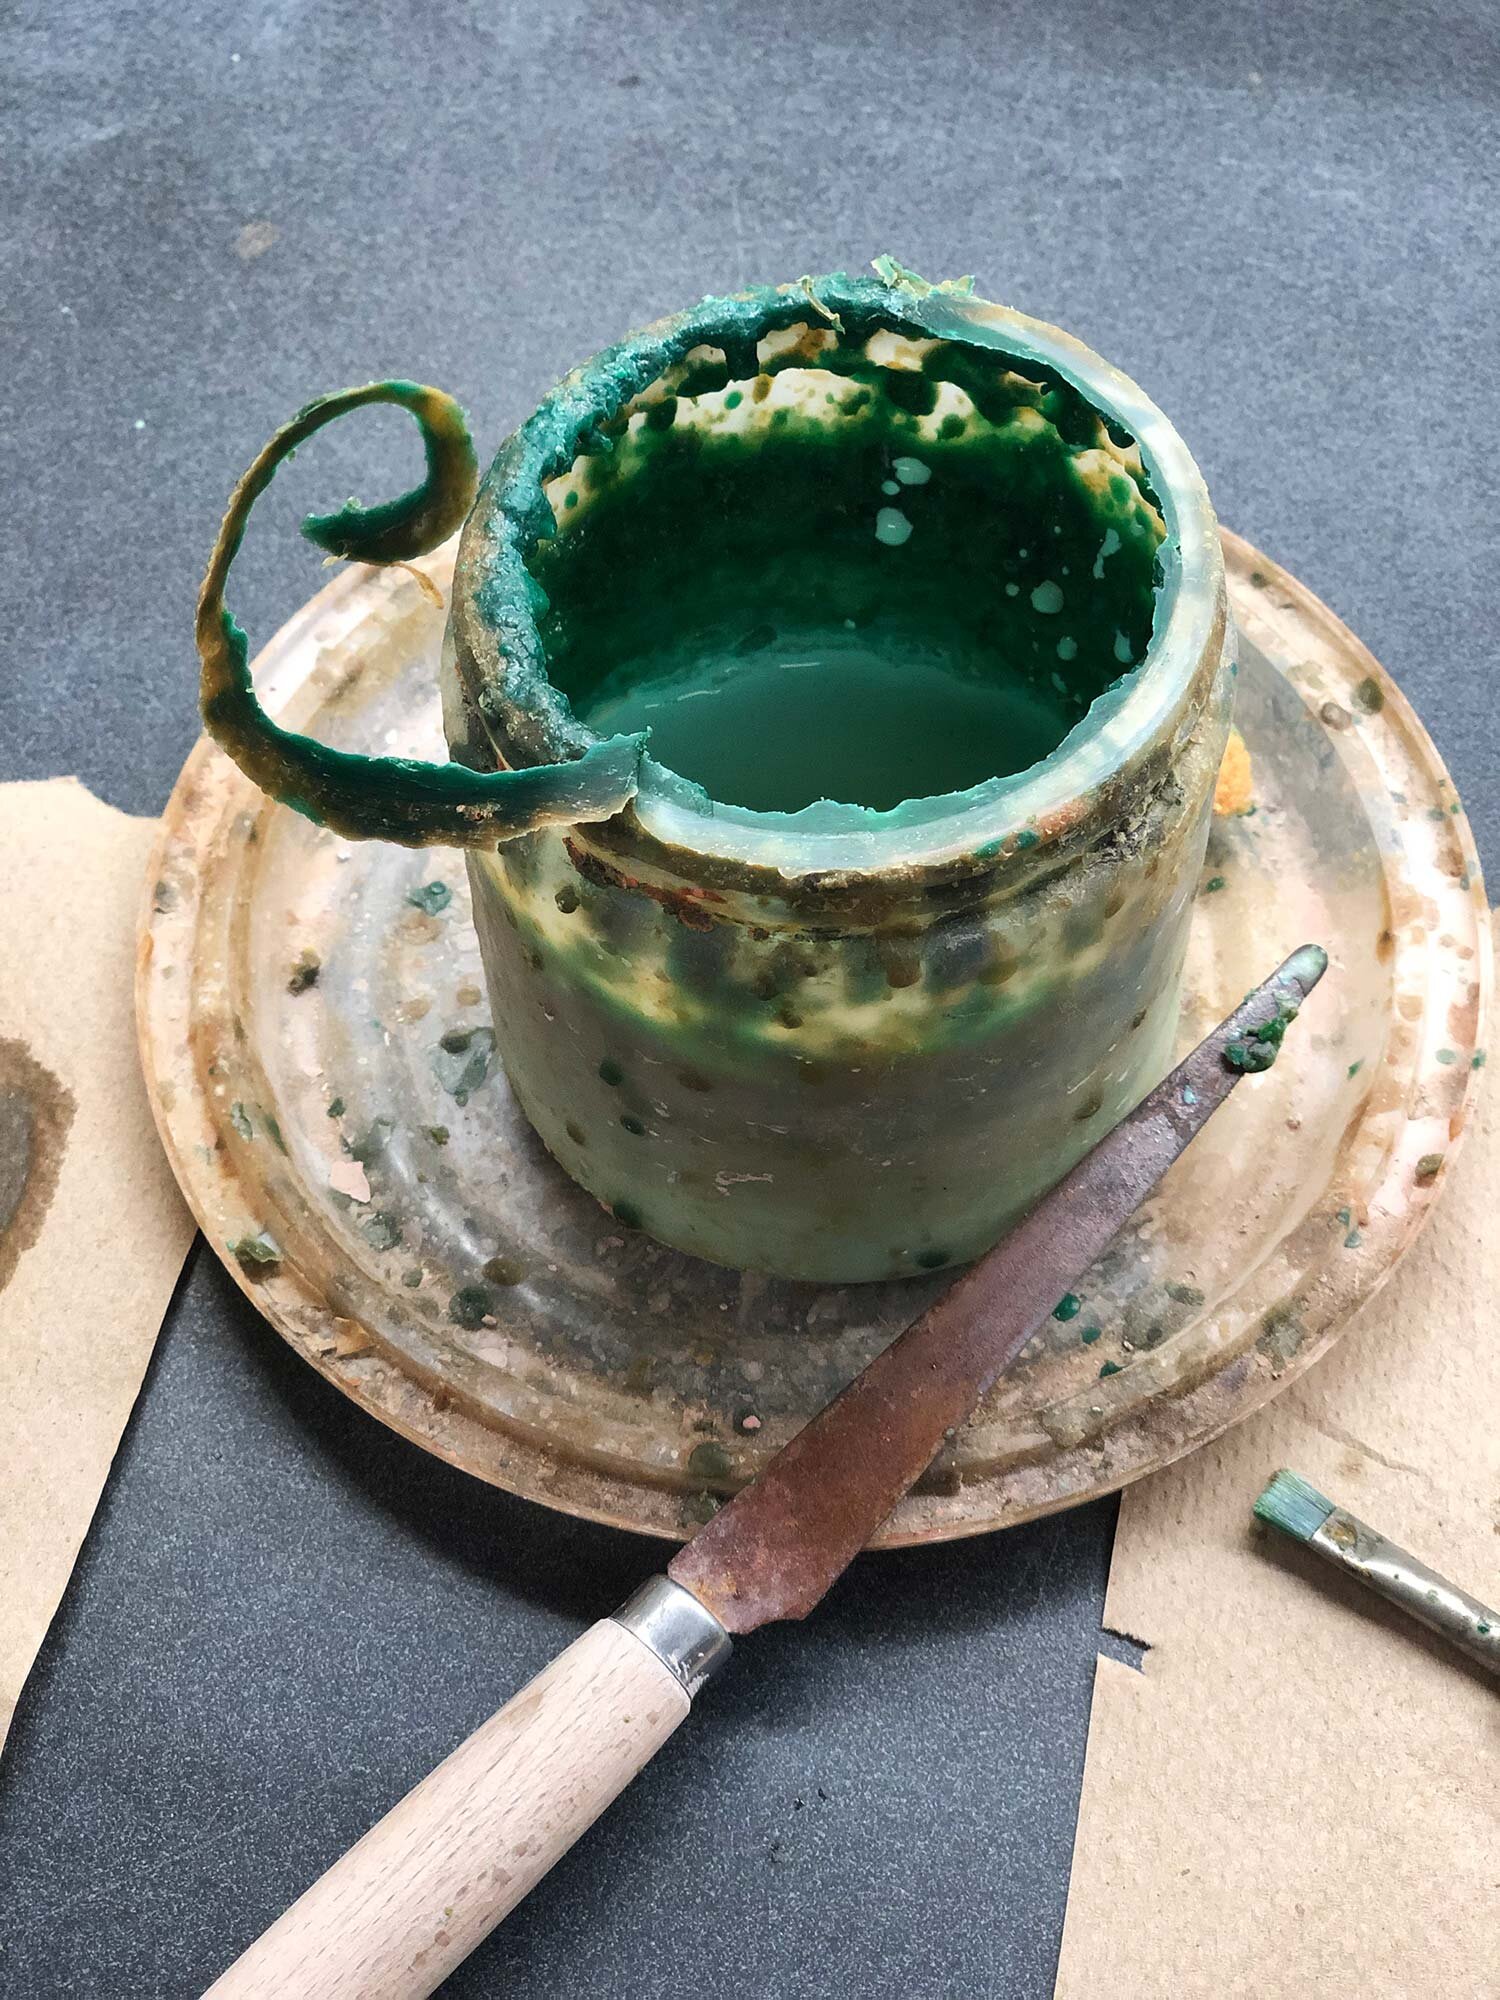 How To Use and Clean Up Wax Resist in a Ceramics Studio — The Studio Manager